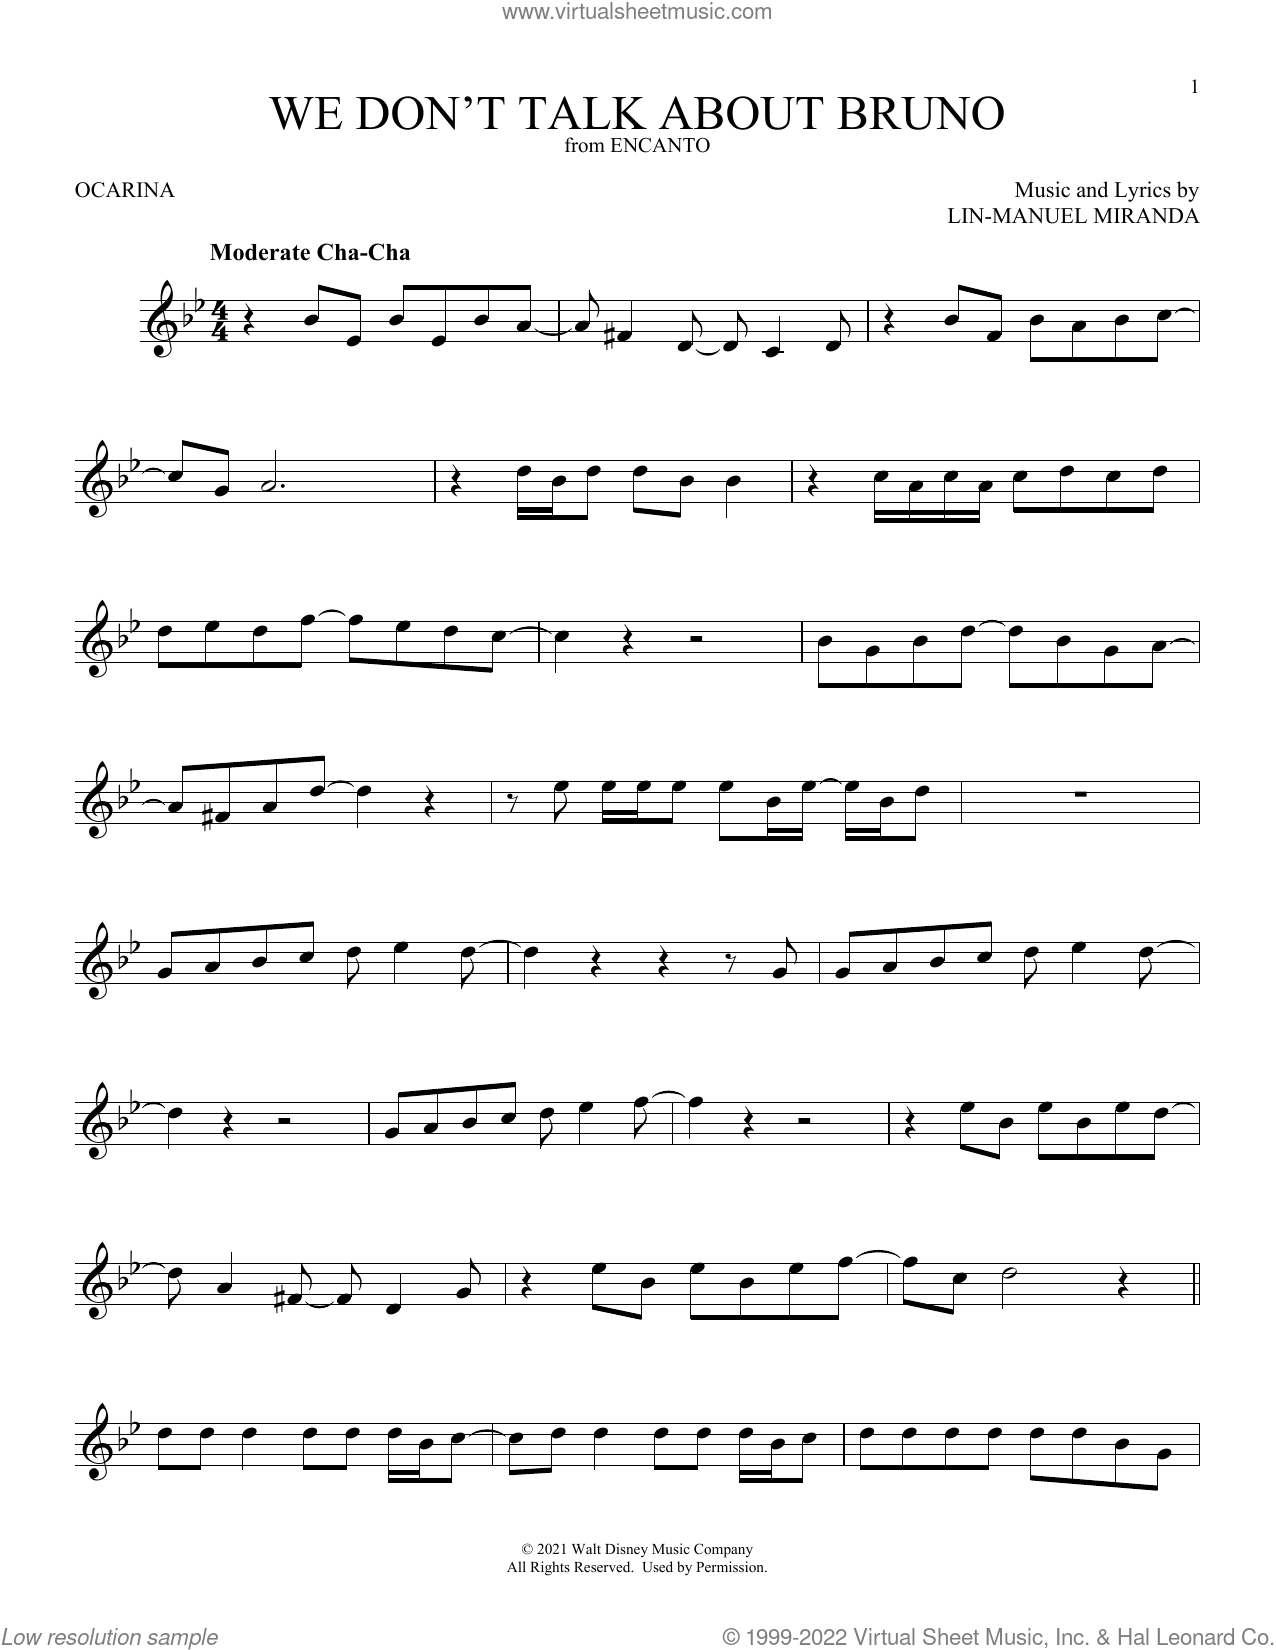 Ocarina of Time Music sheet music  Play, print, and download in PDF or  MIDI sheet music on